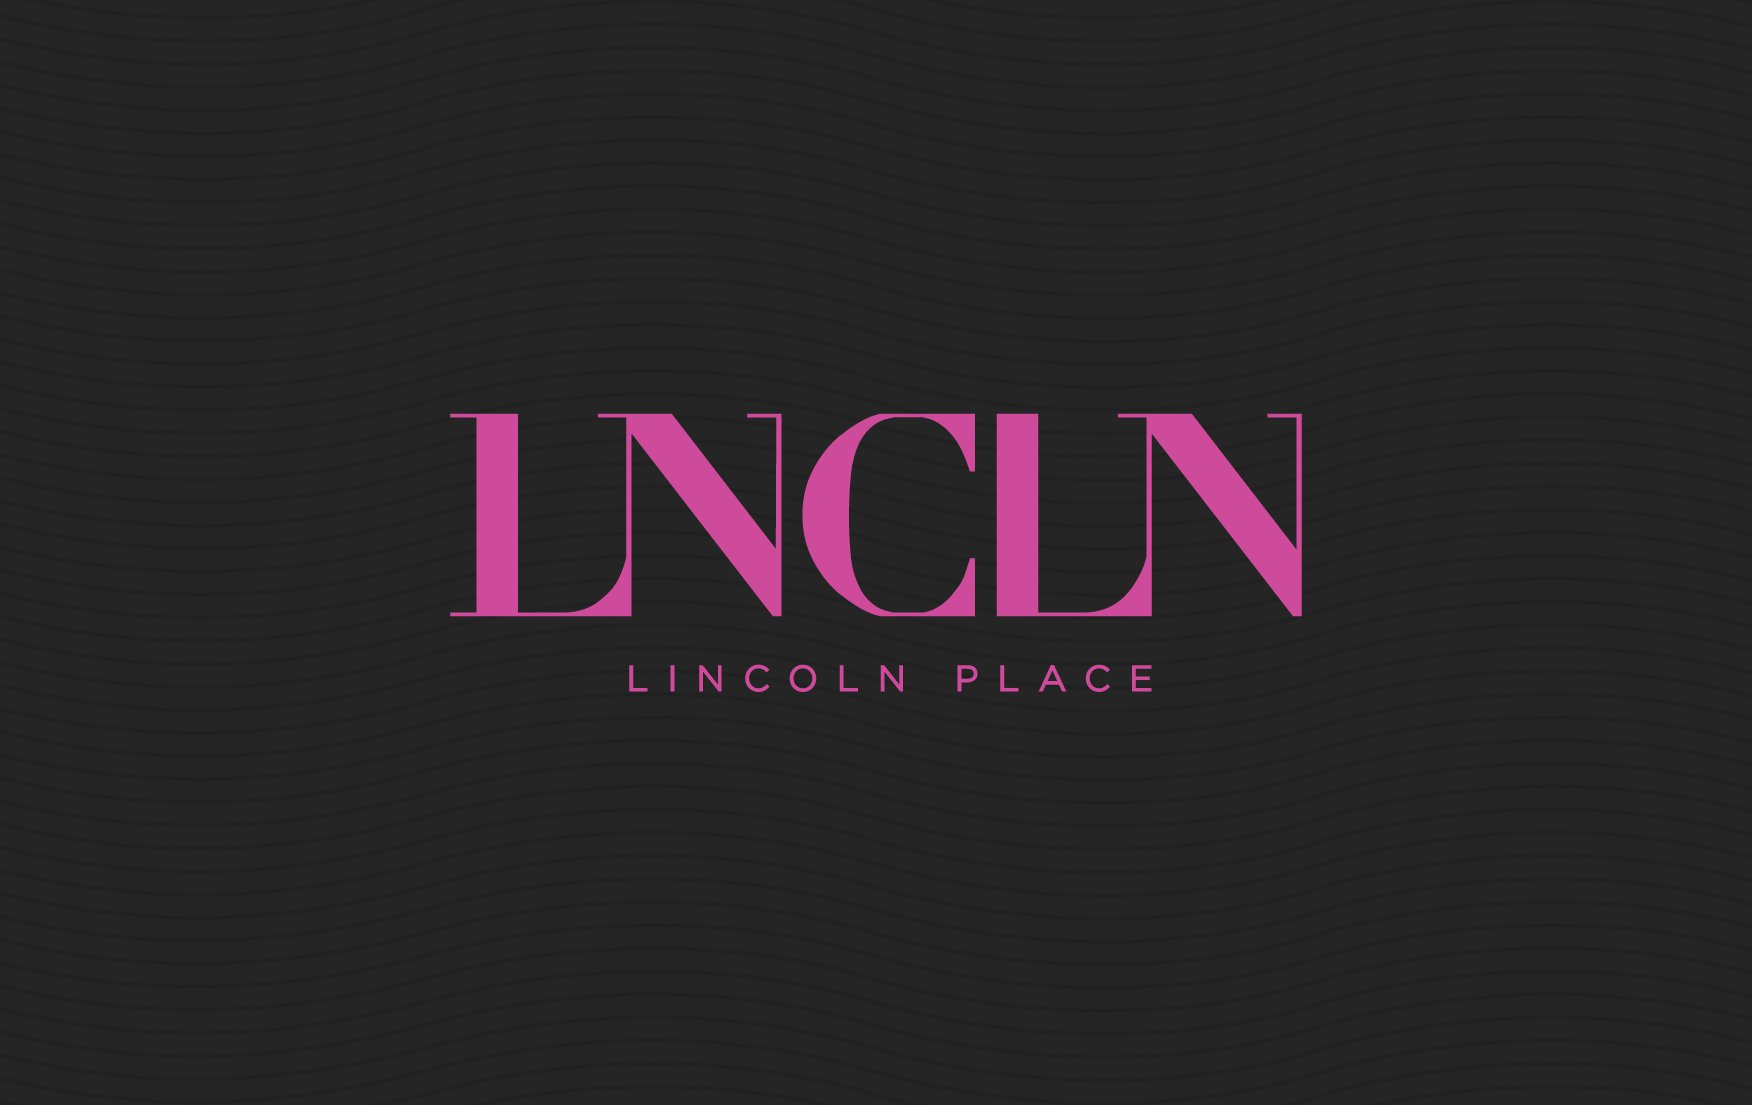 Lincoln Place